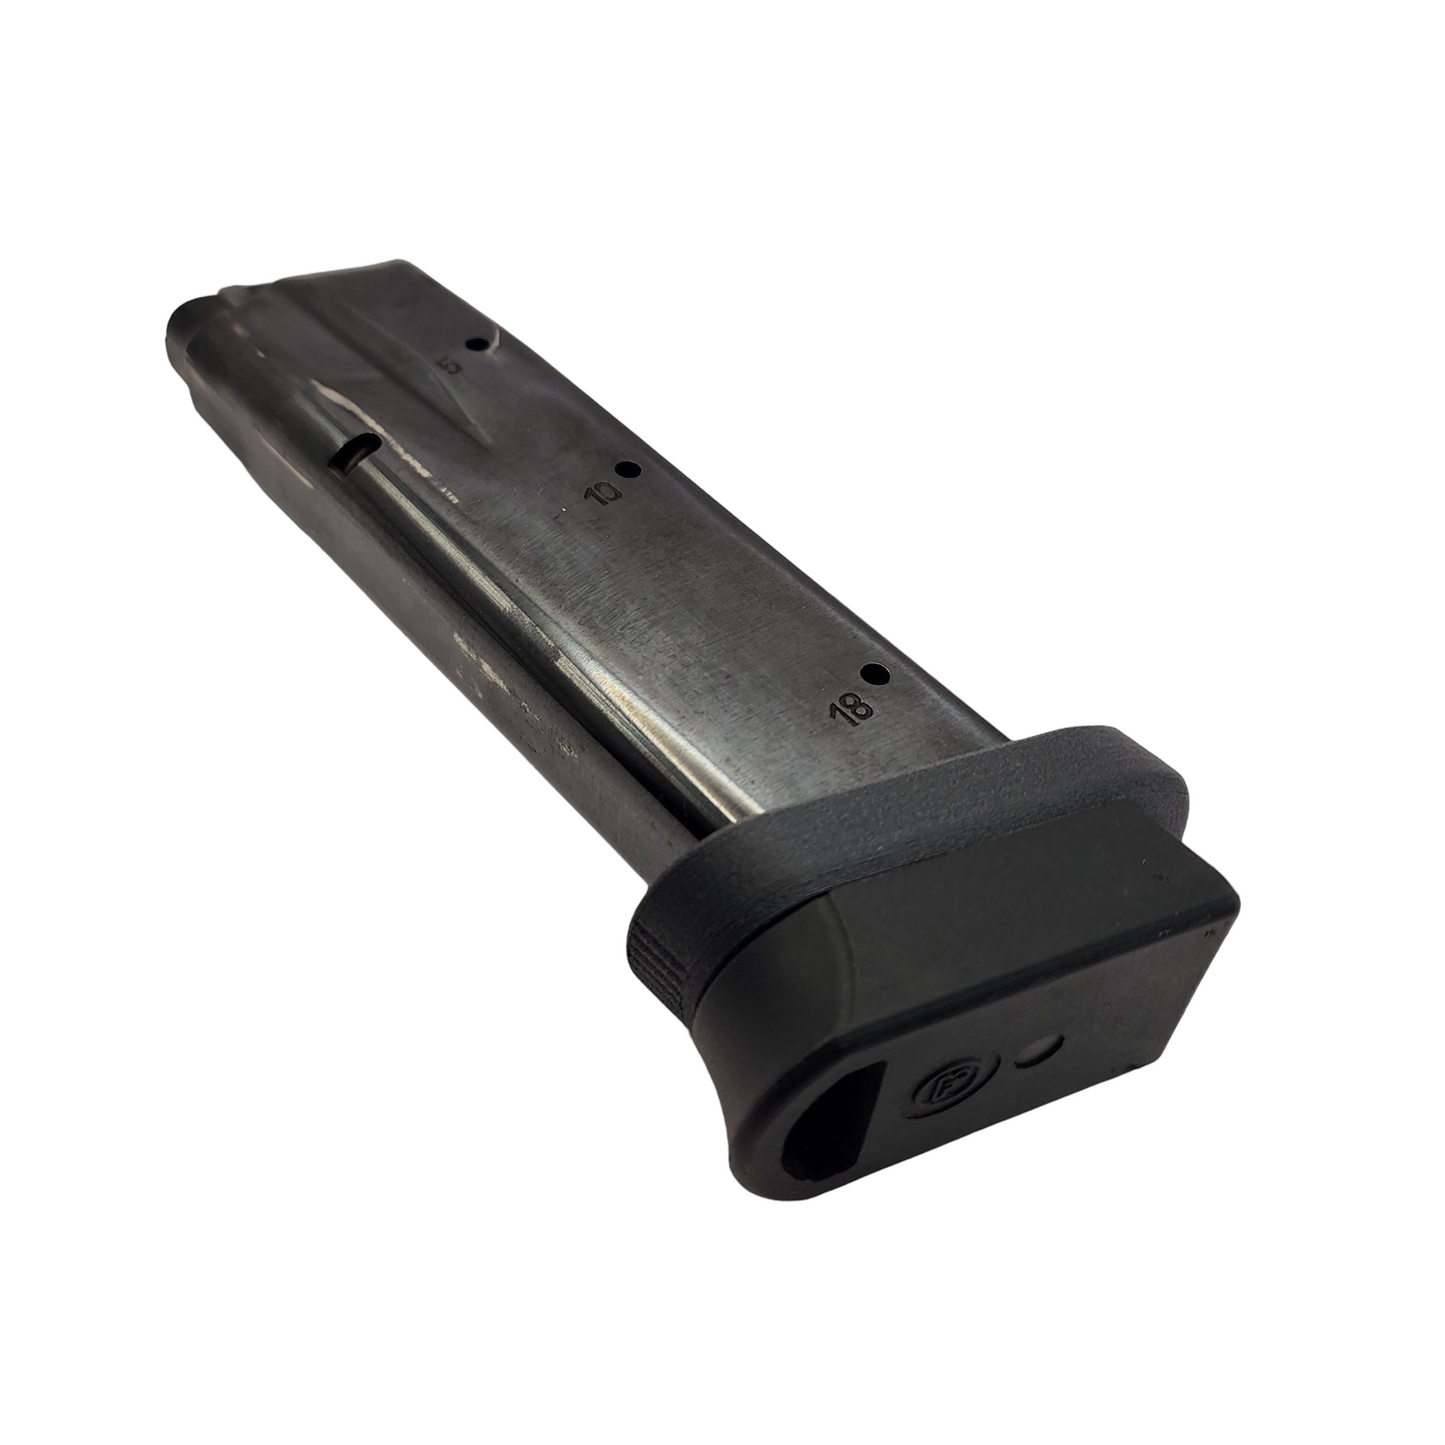 The simplicity of a magazine adapter lets you run larger magazines safely and comfortably in your compact CZ75, P01, and PCR